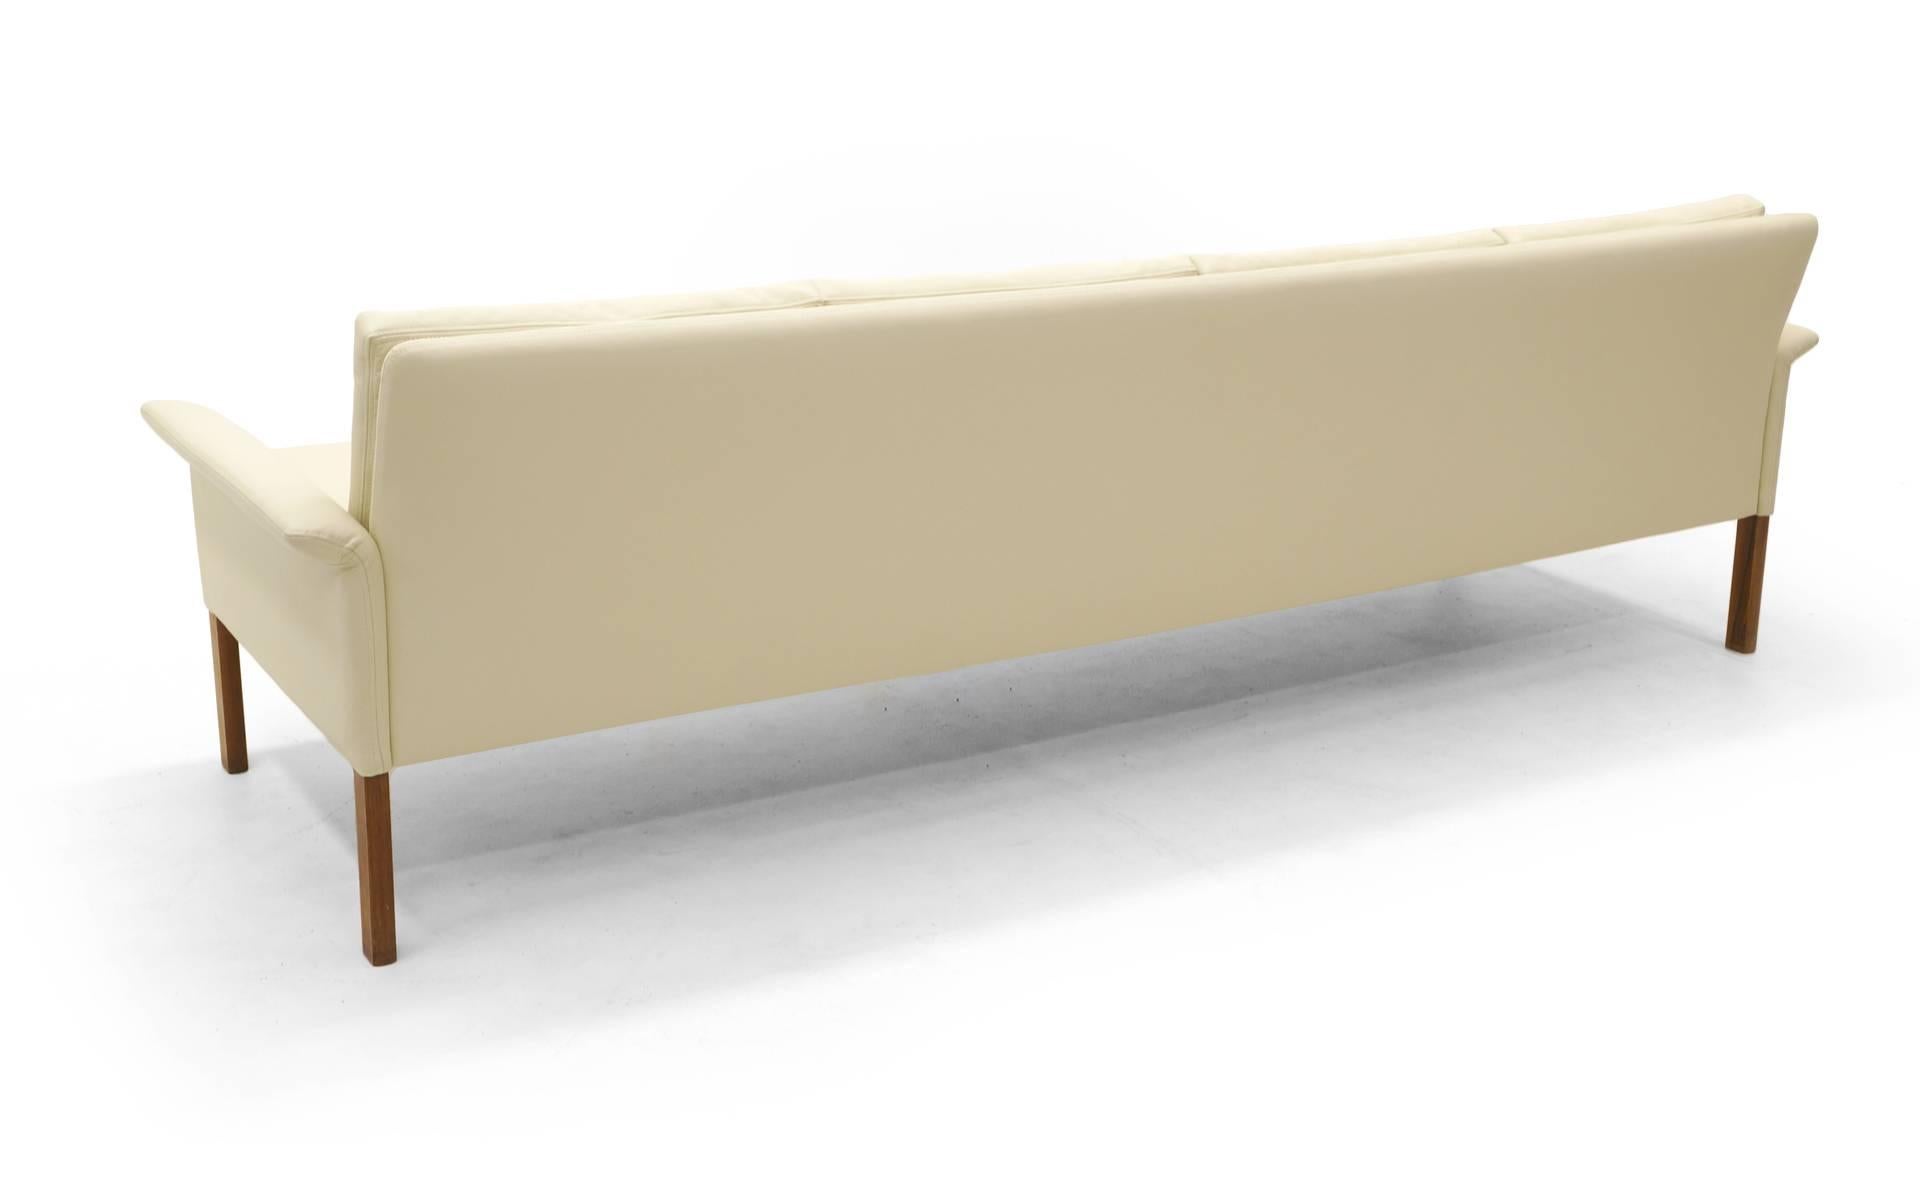 Mid-20th Century Four-Seat Sofa by Hans Olsen, White/ Ivory Leather with Rosewood Legs. Restored. For Sale